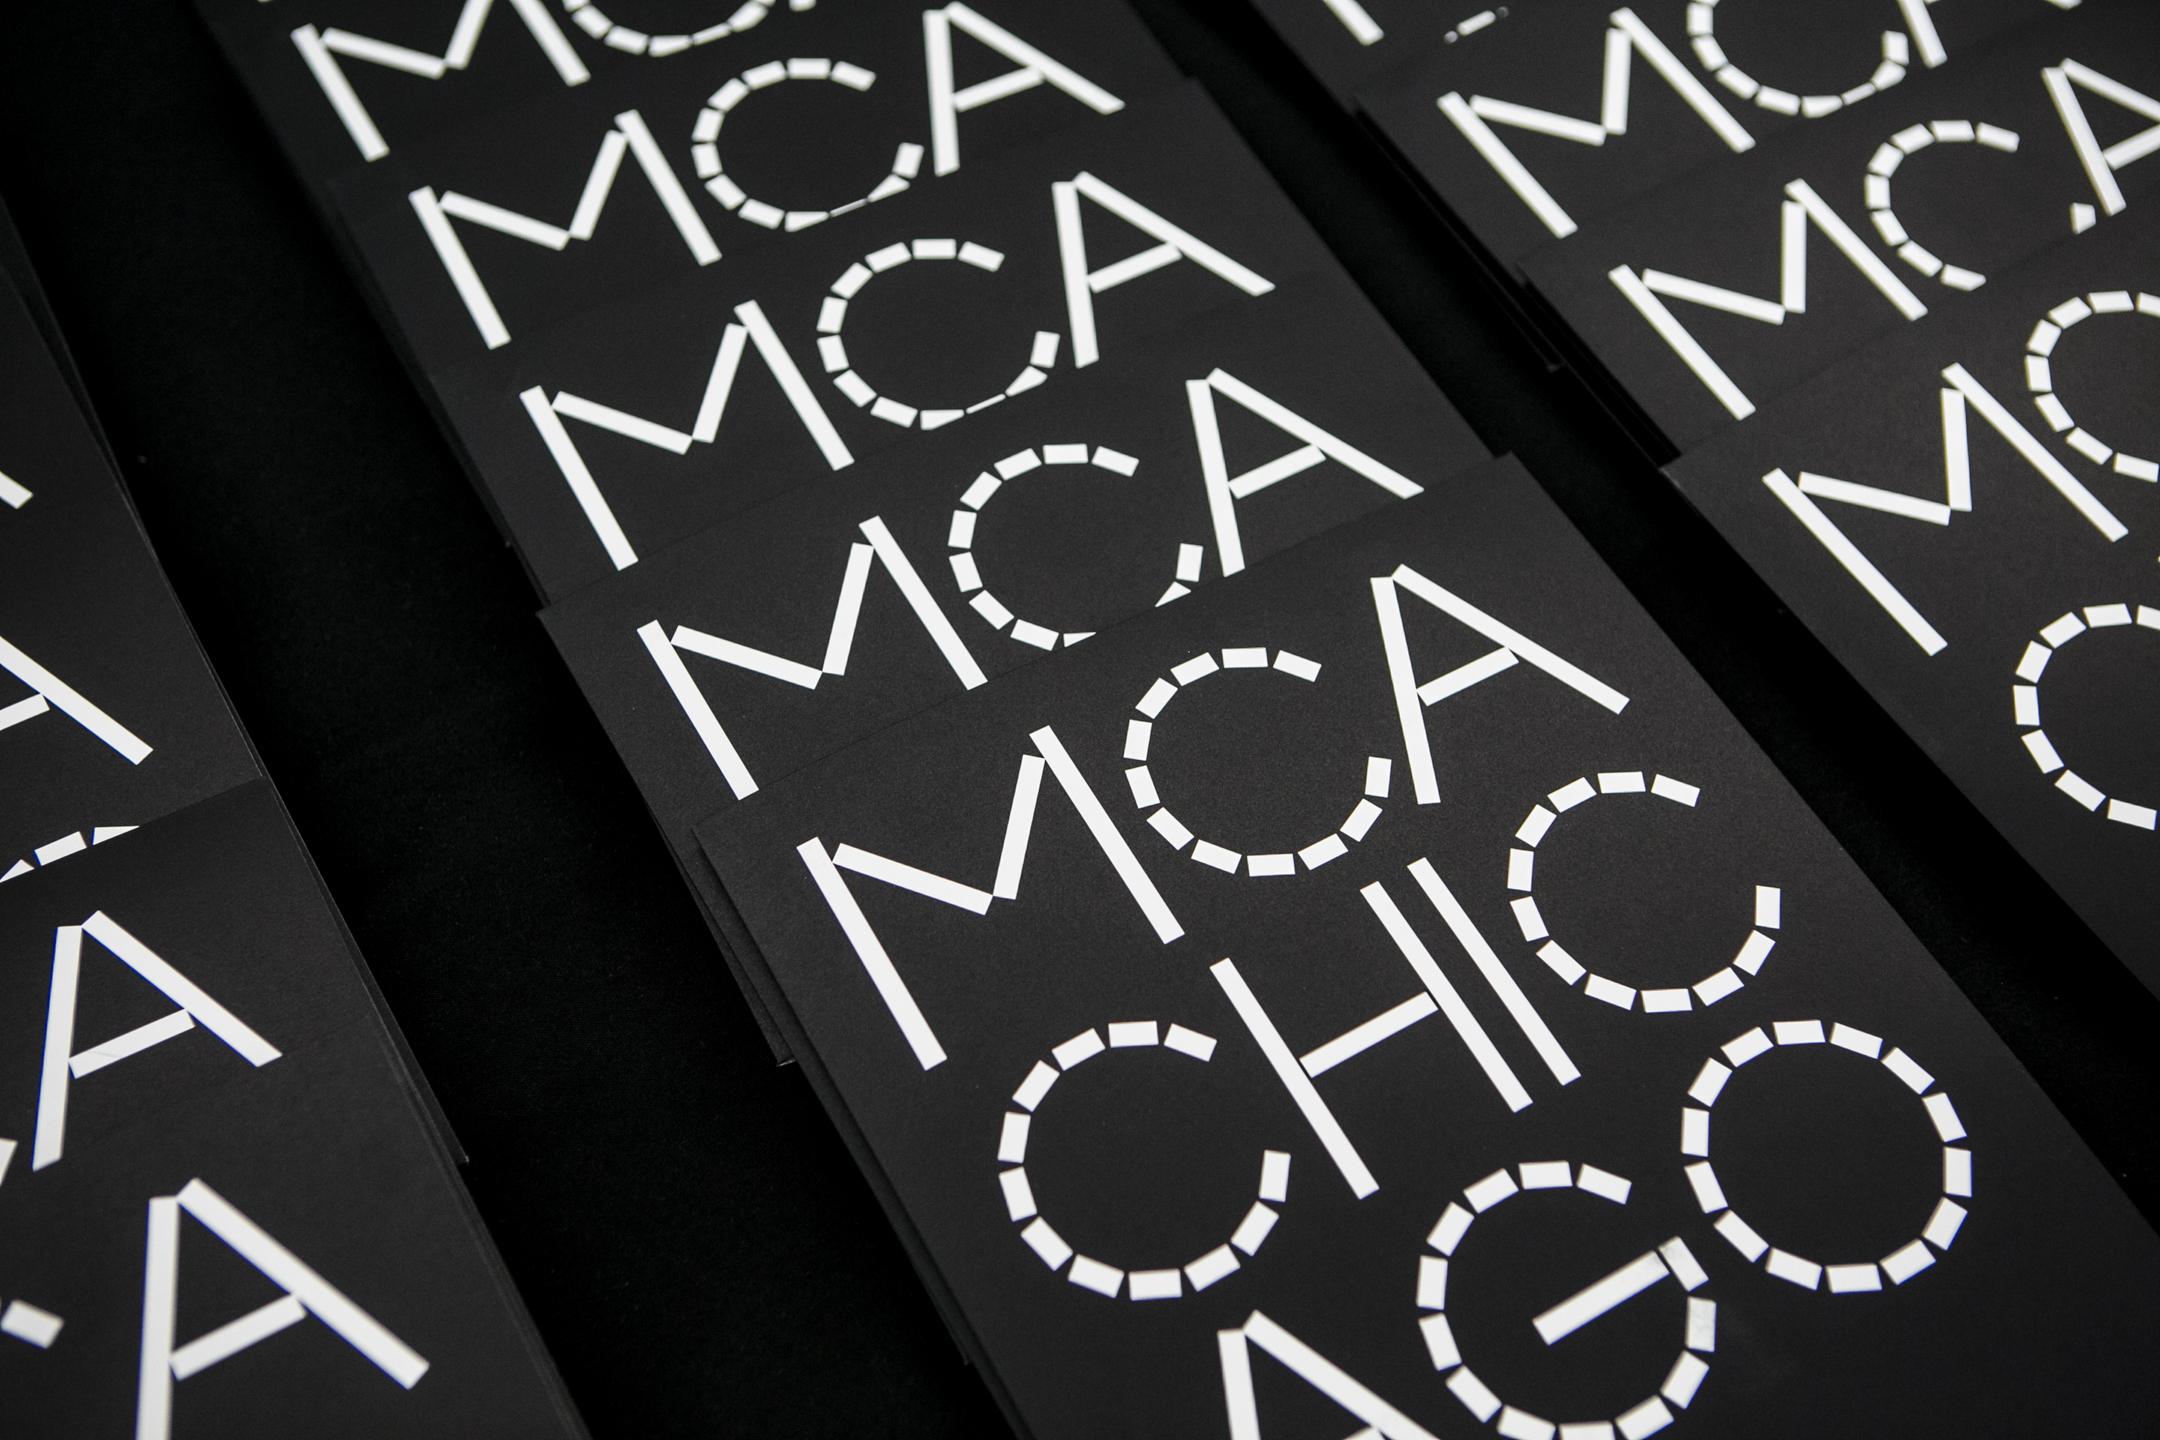 Rows of black folders with a white logo that reads "MCA-CHIC-AGO" are lined up to repeat "MCA."